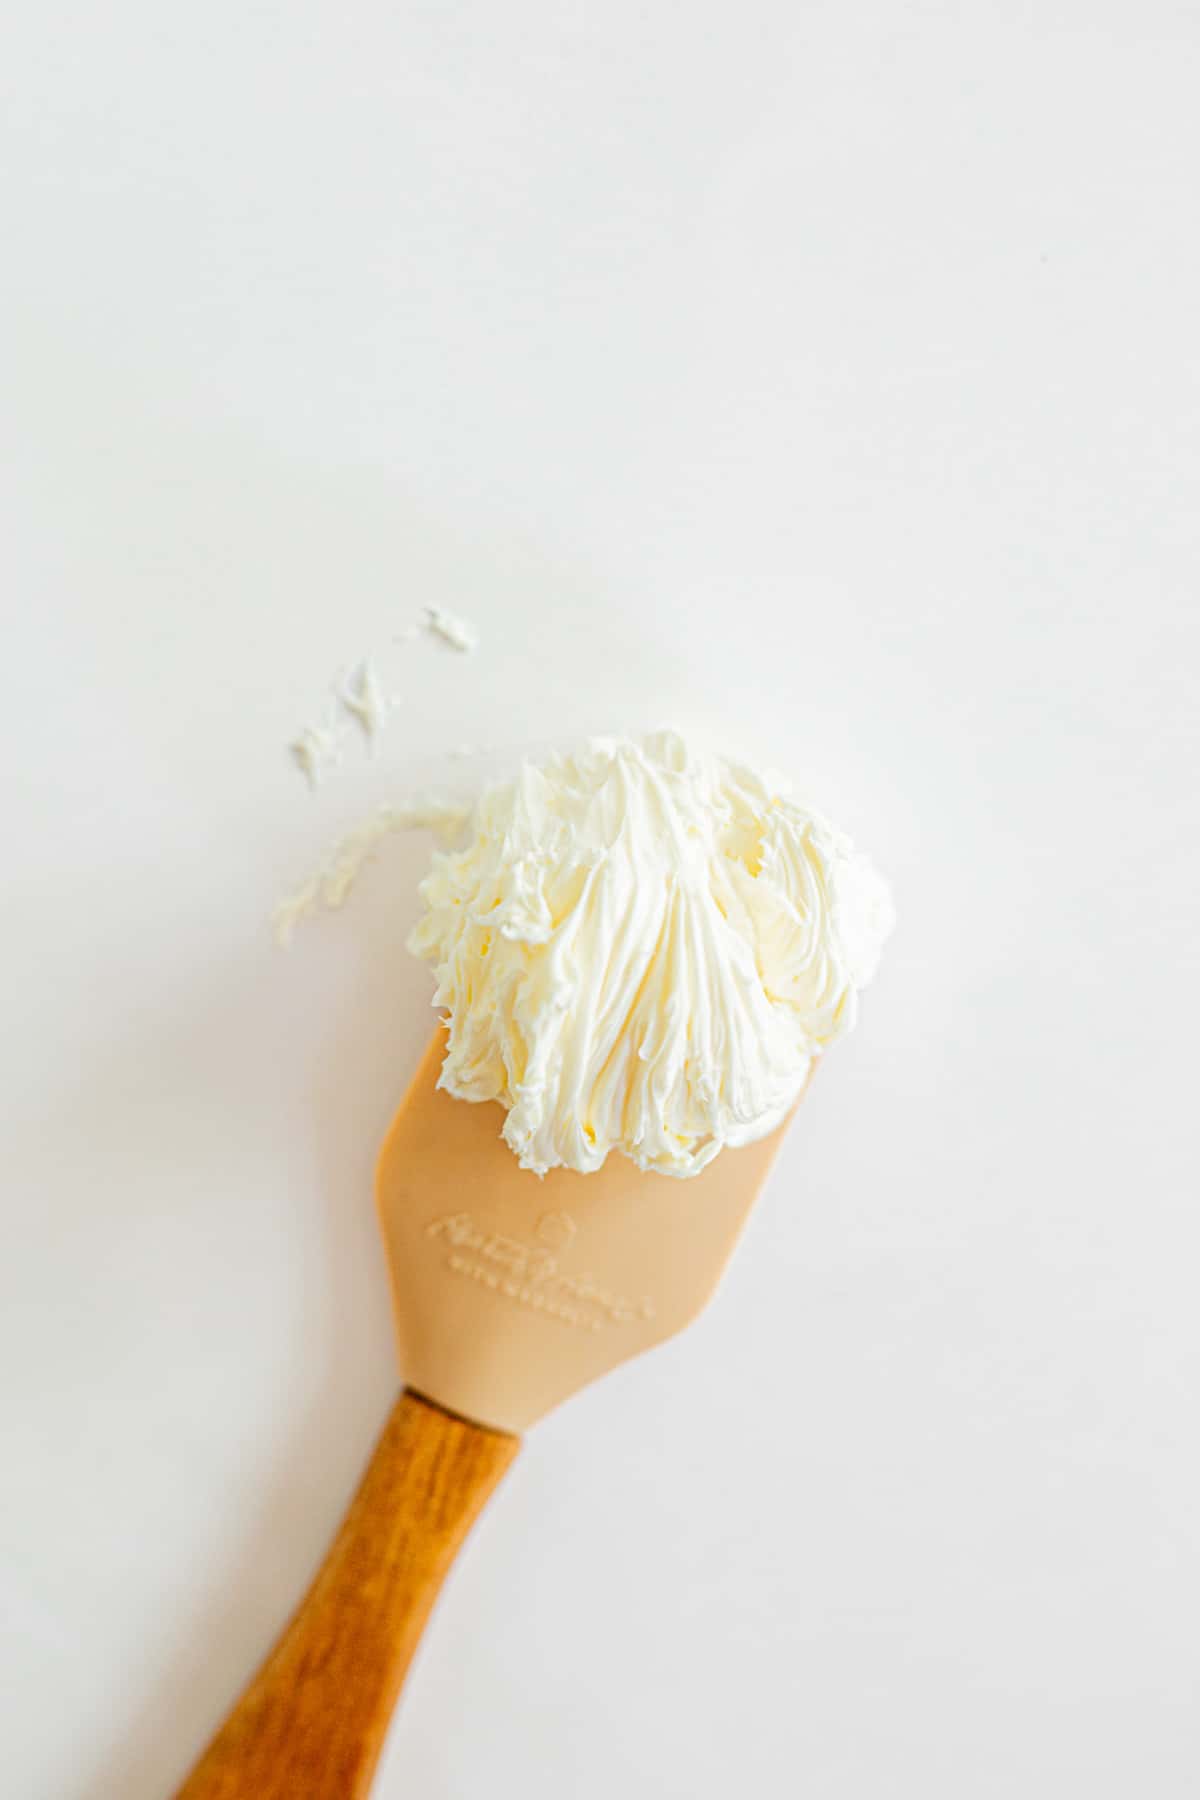 whipped butter on a tan rubber spatula.